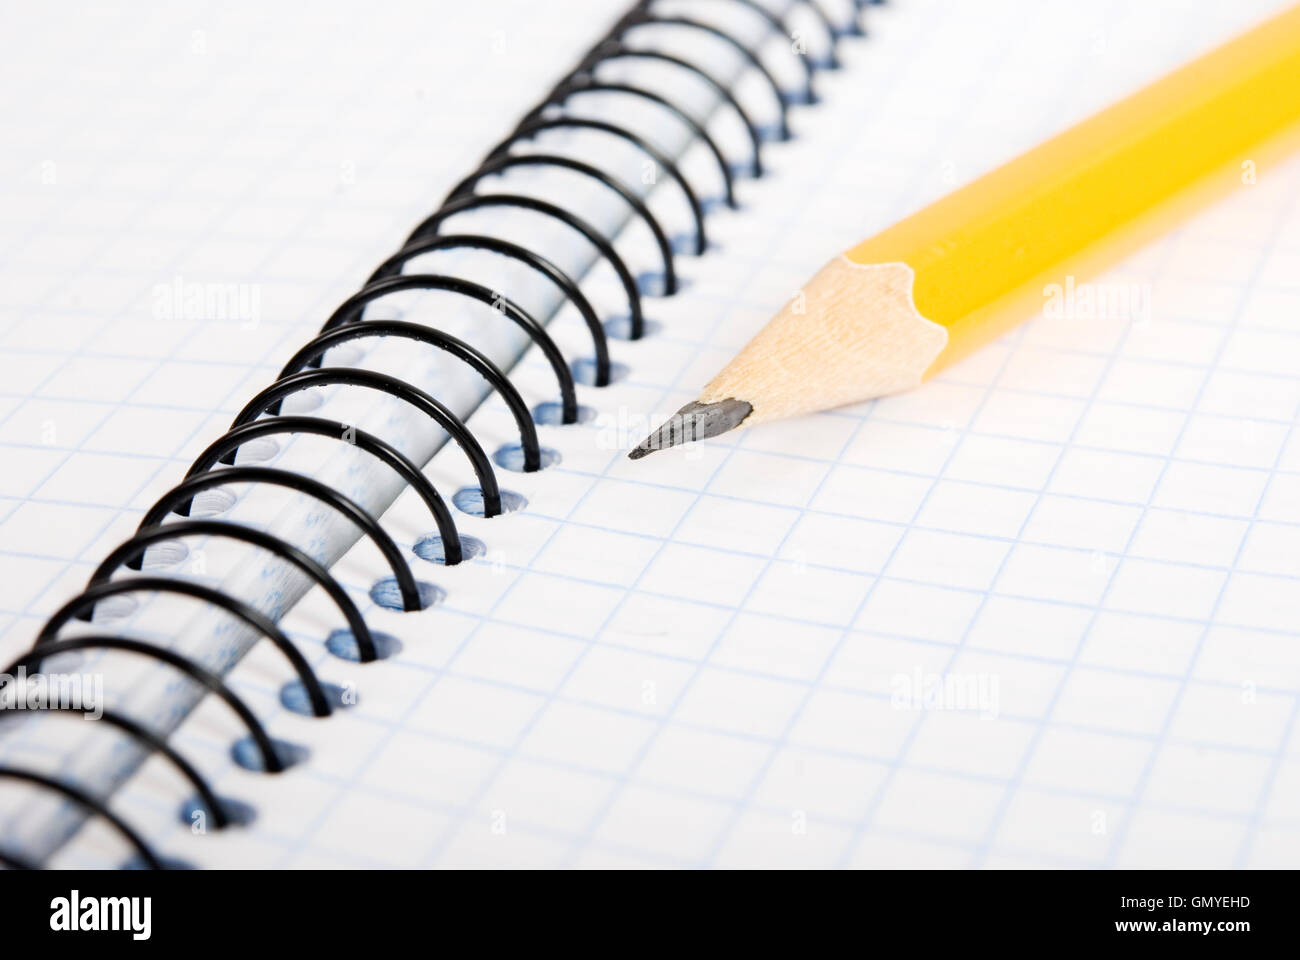 Blank notebook and pencil Stock Photo